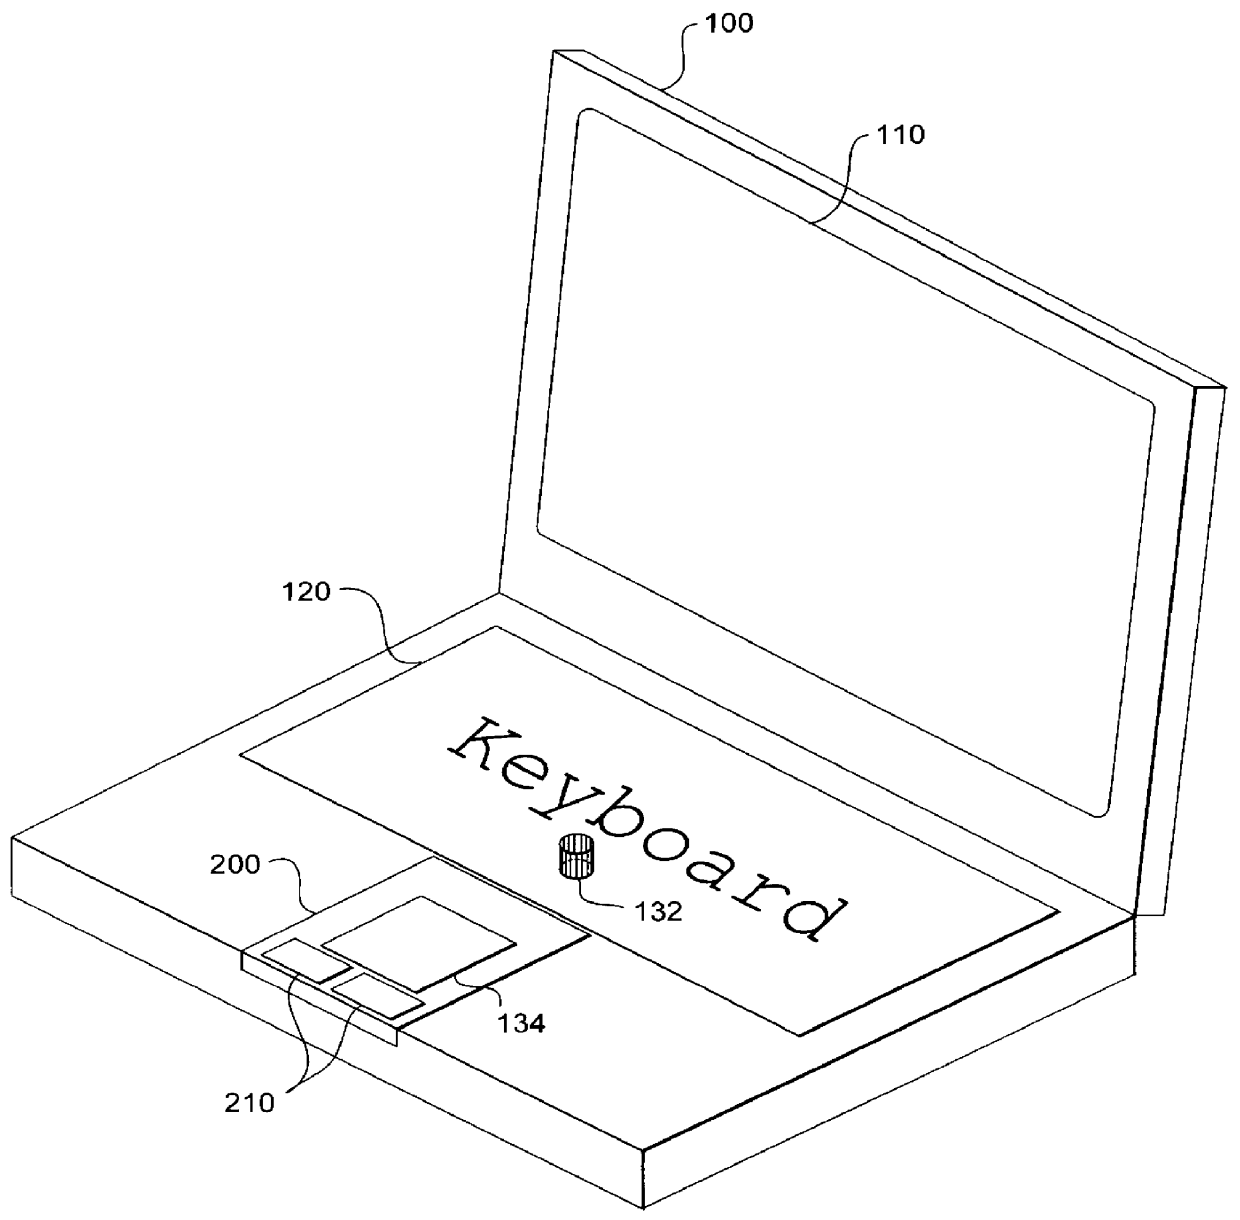 Laptop with buttons configured for use with multiple pointing devices